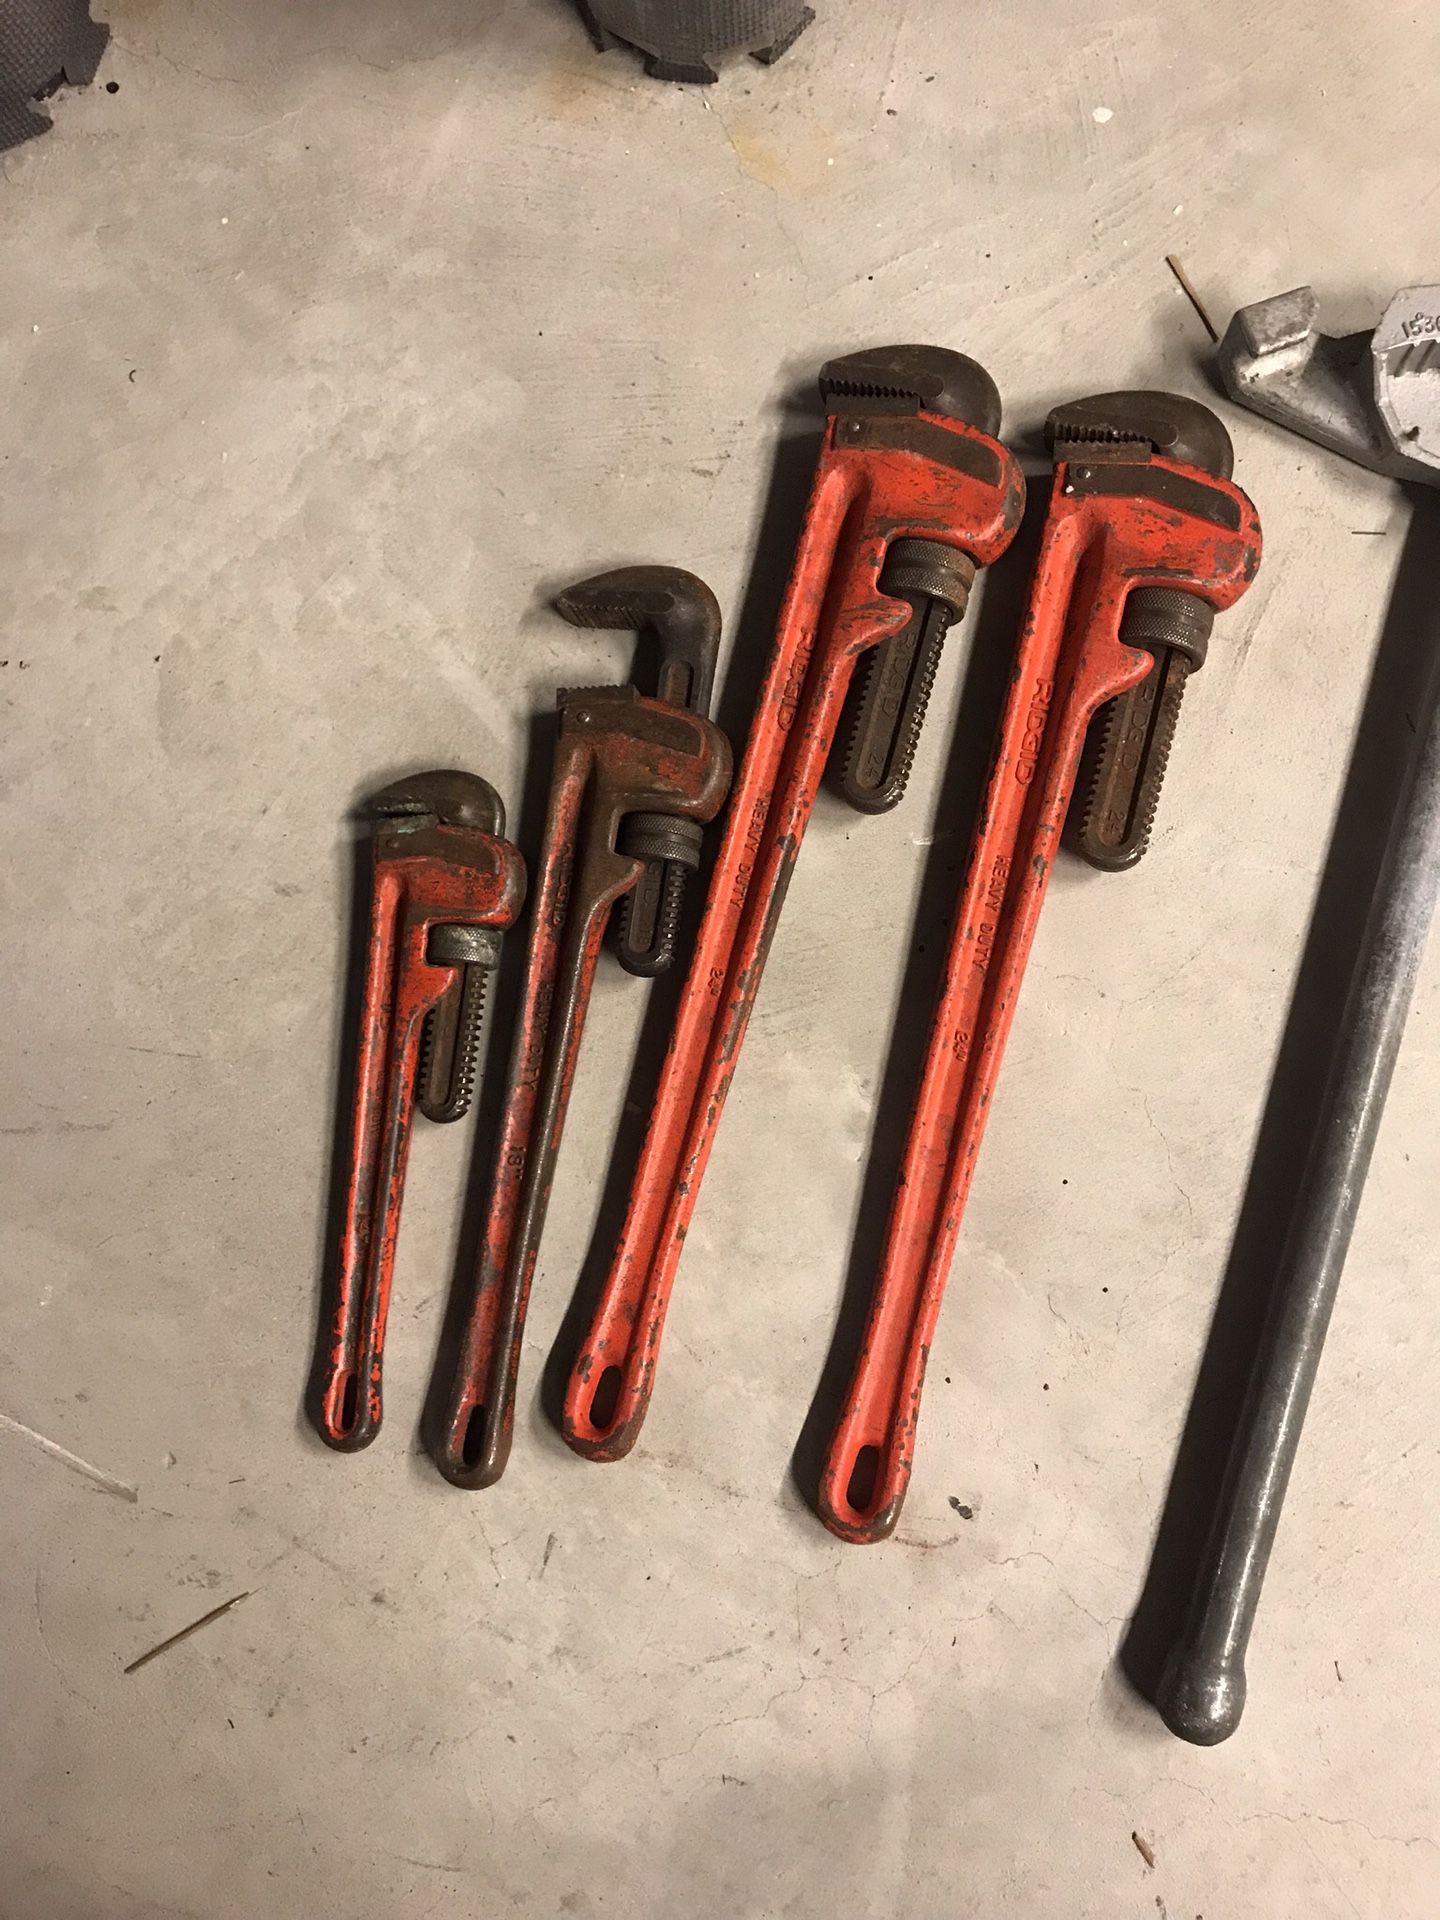 Ridgid Heavy duty Straight Pipe Wrenches/adjustable wrenches and Manual tube bender